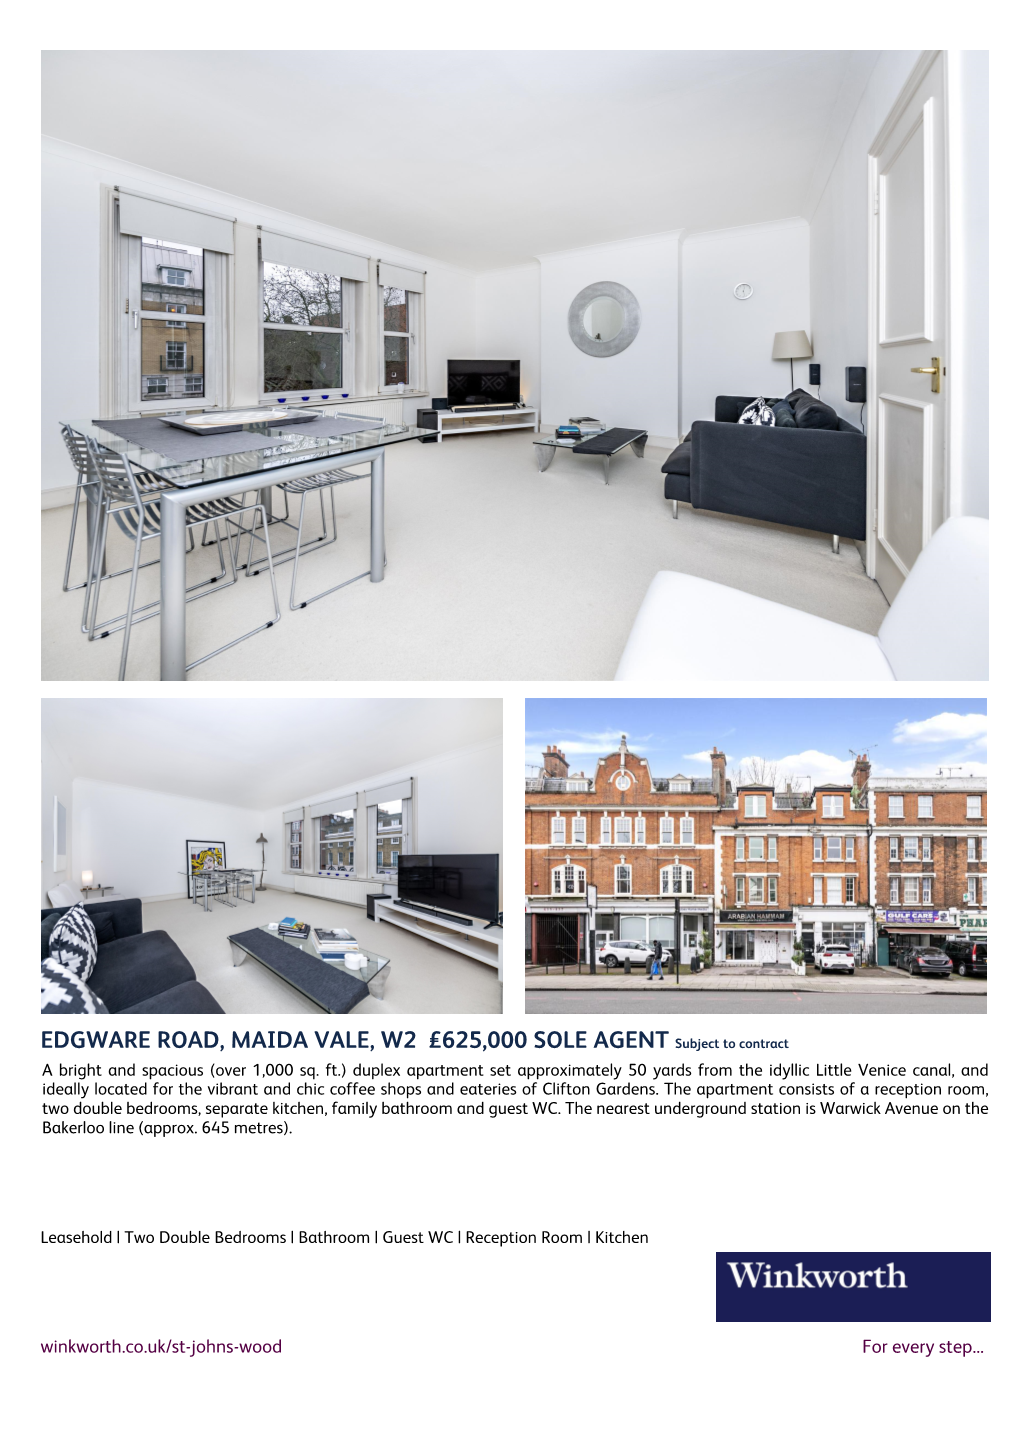 EDGWARE ROAD, MAIDA VALE, W2 1TH £625,000 SOLE AGENT Subject to Contract